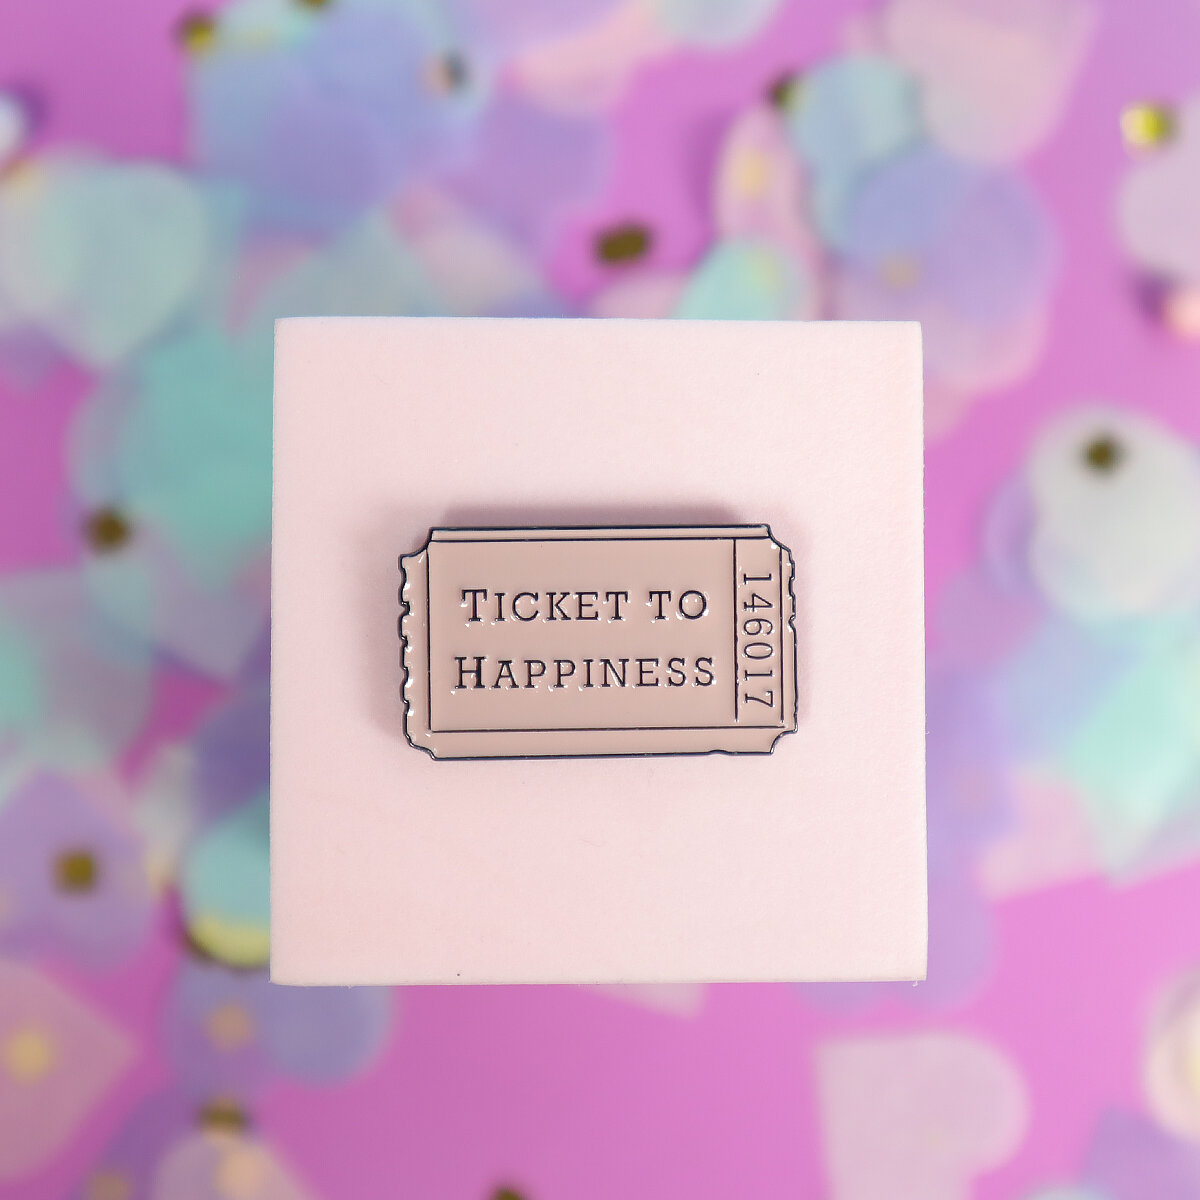 Pin - Ticket to happiness